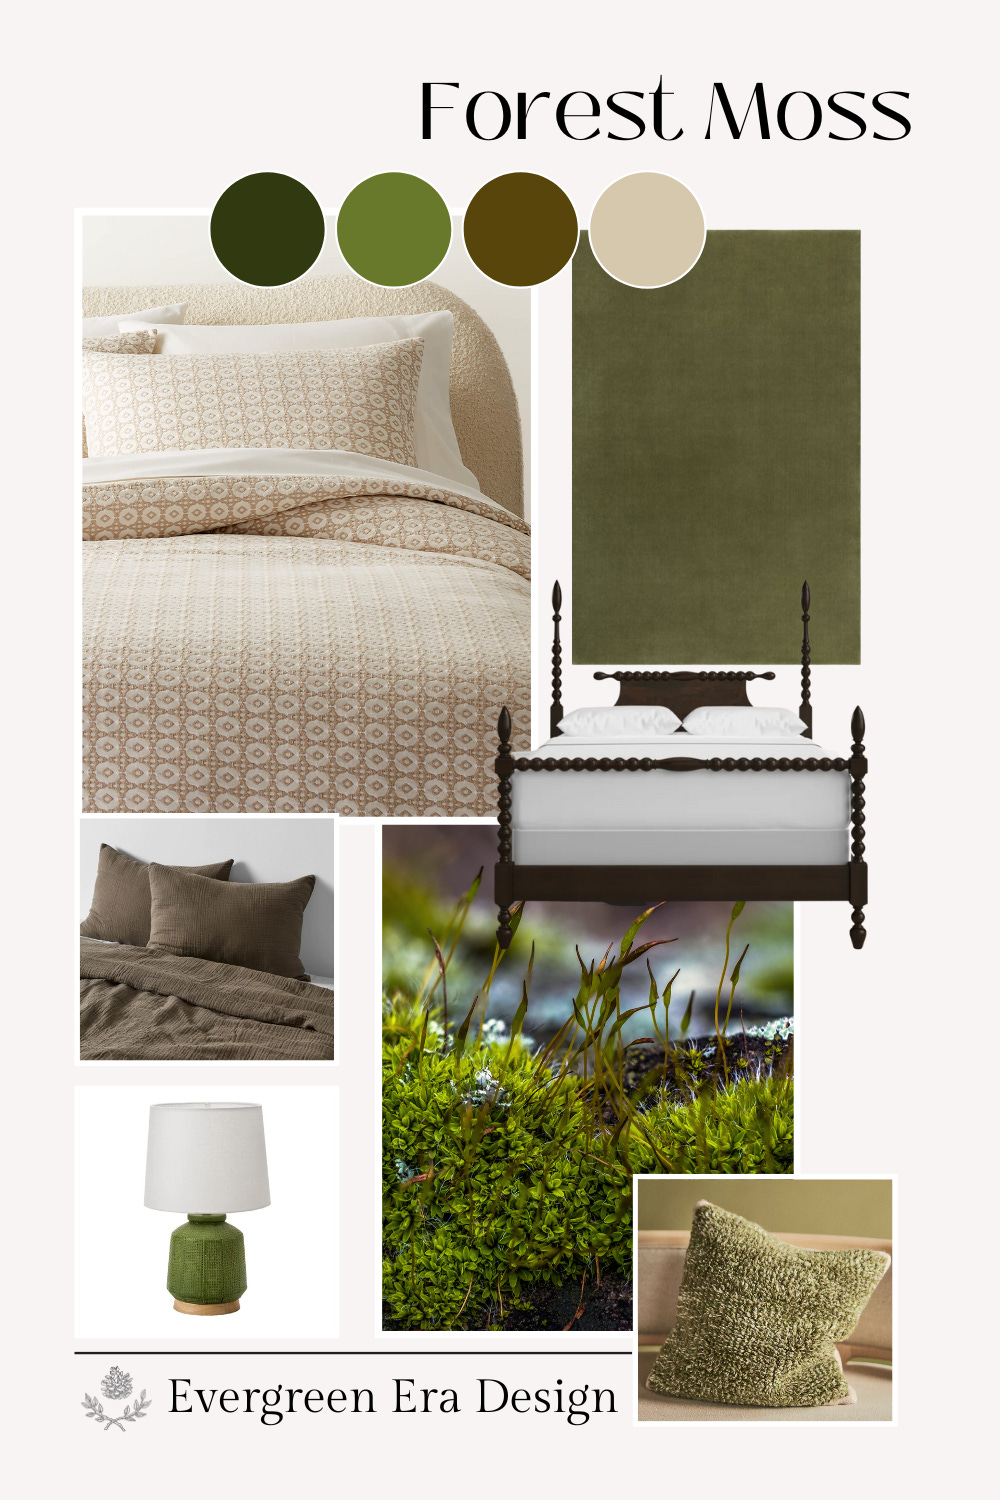 Bedroom mood board based on nature, forest moss.